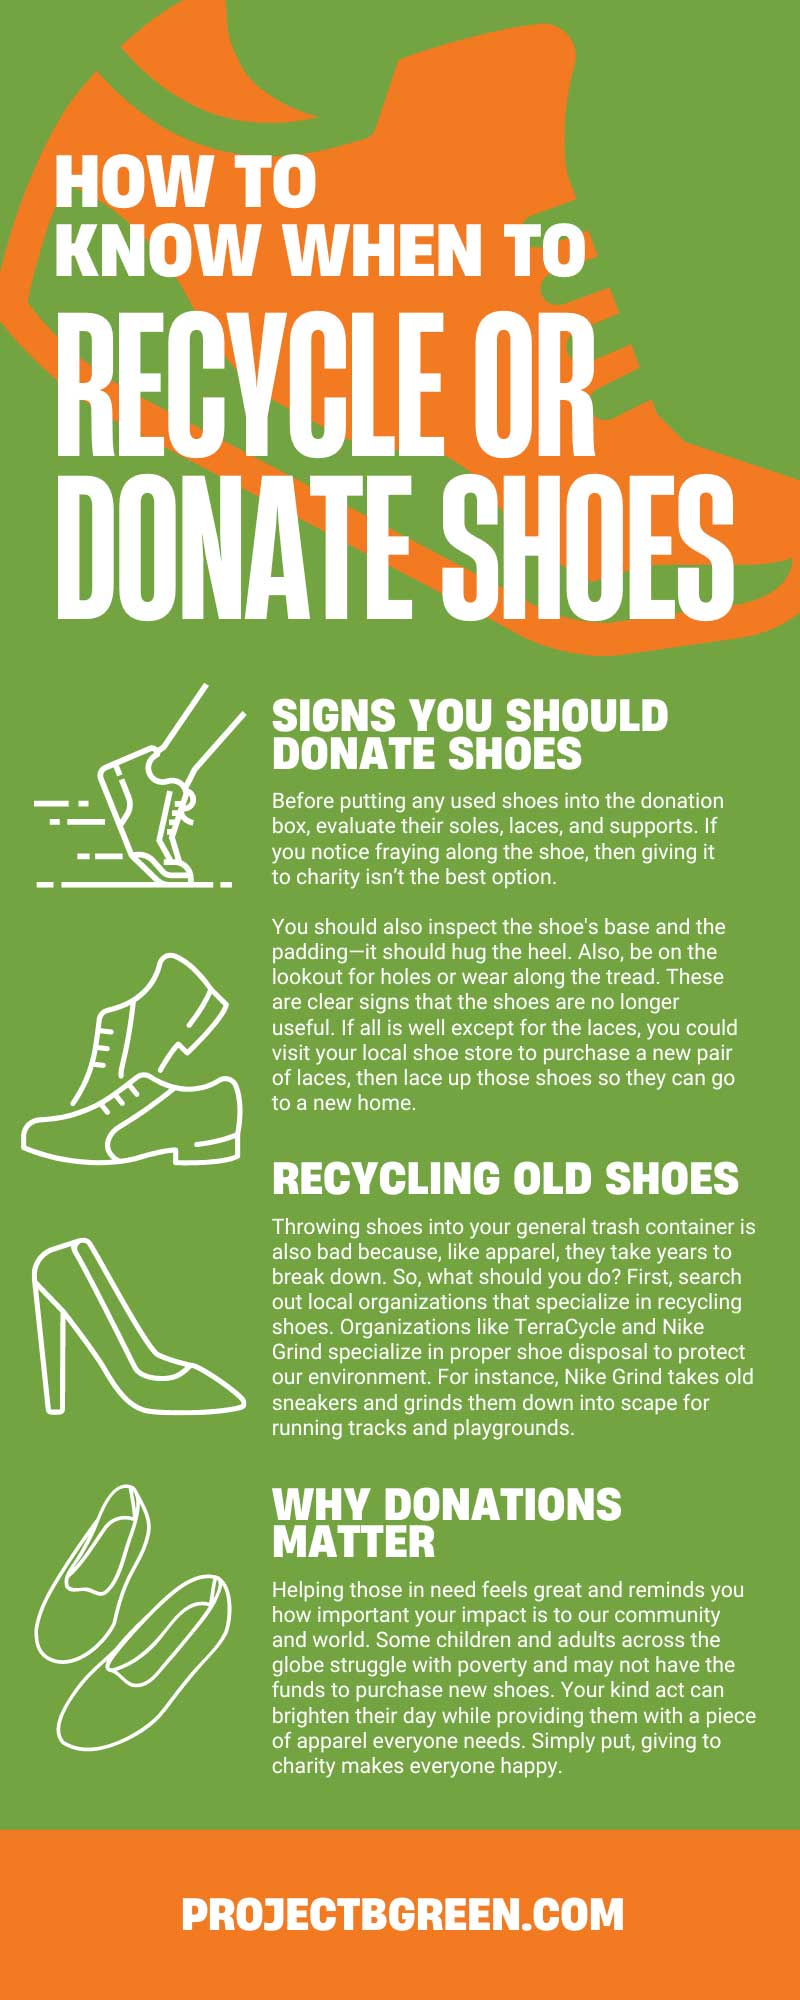 How To Know When To Recycle or Donate Shoes